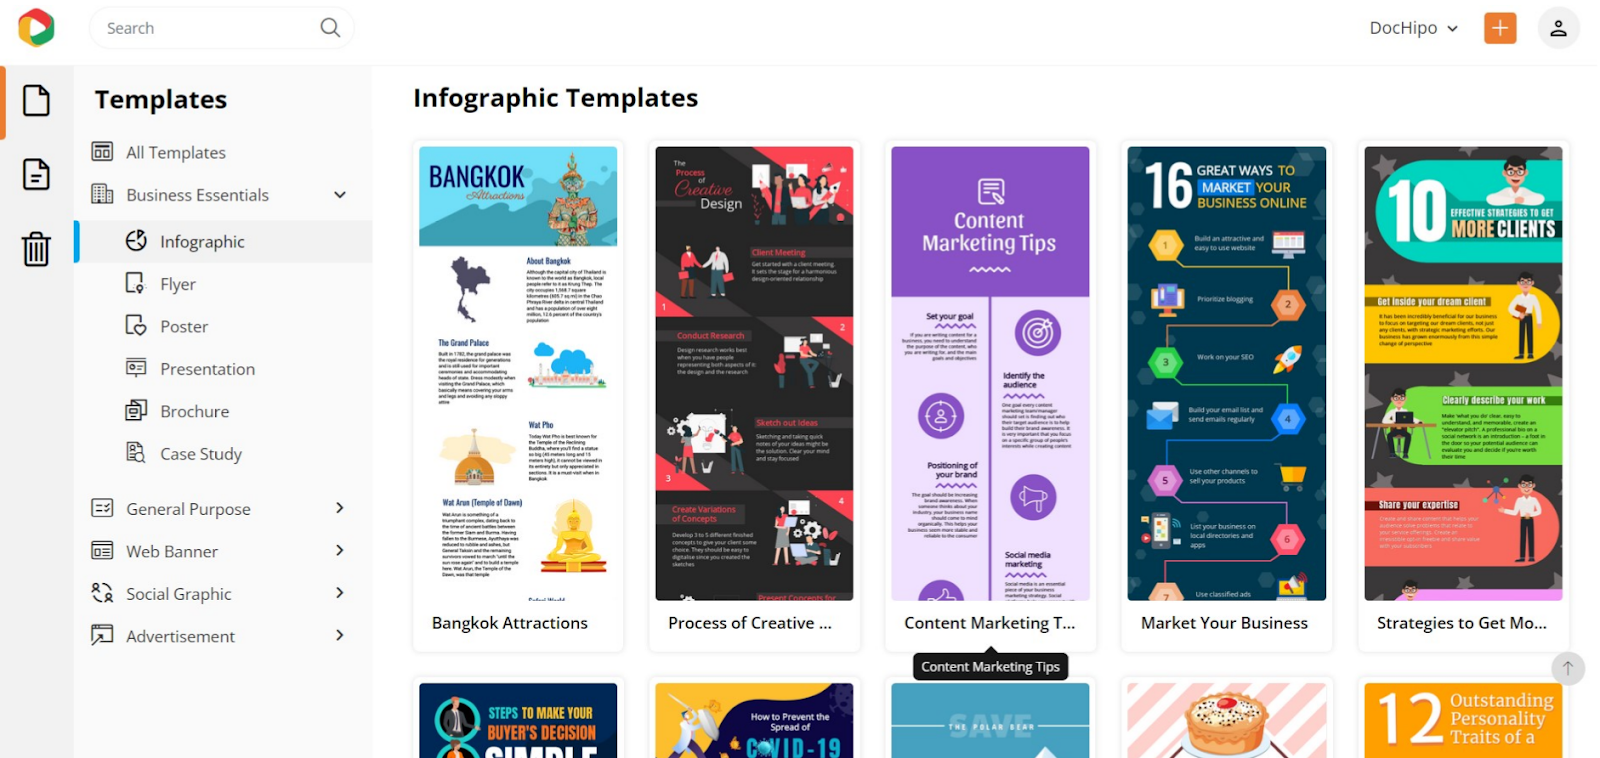 Many infographic templates